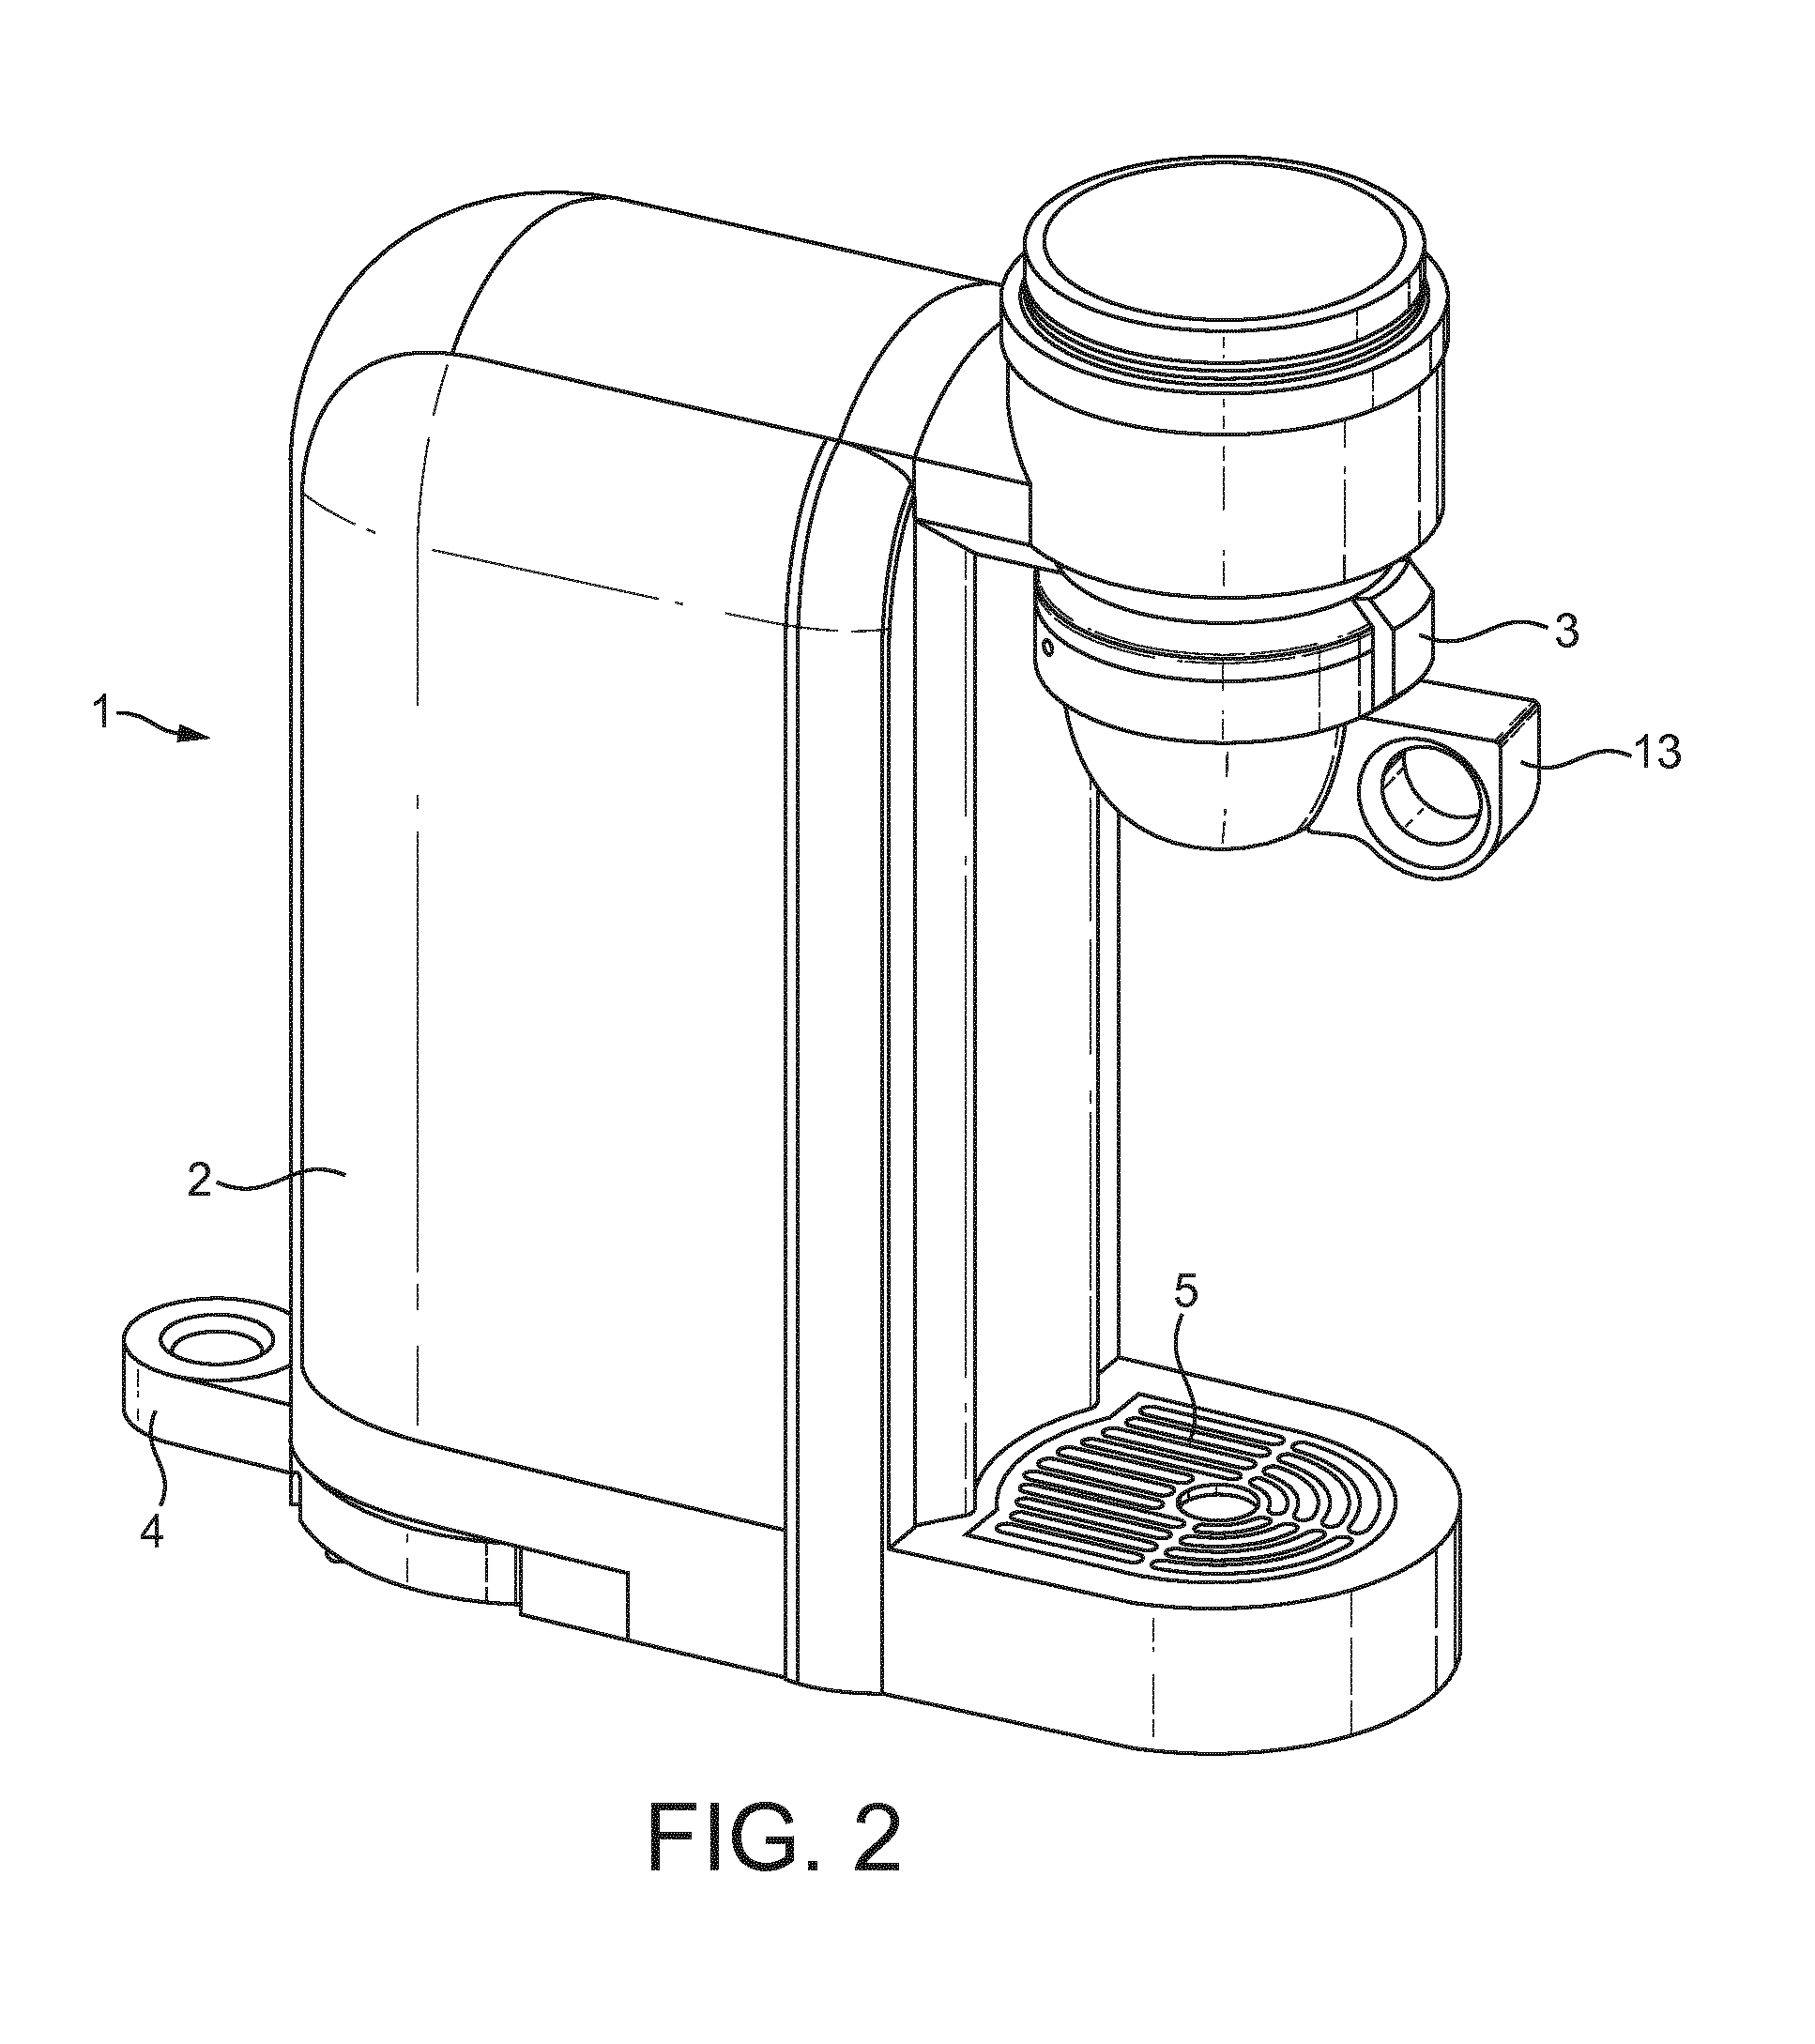 A food or beverage preparation machine with detachable brewing unit